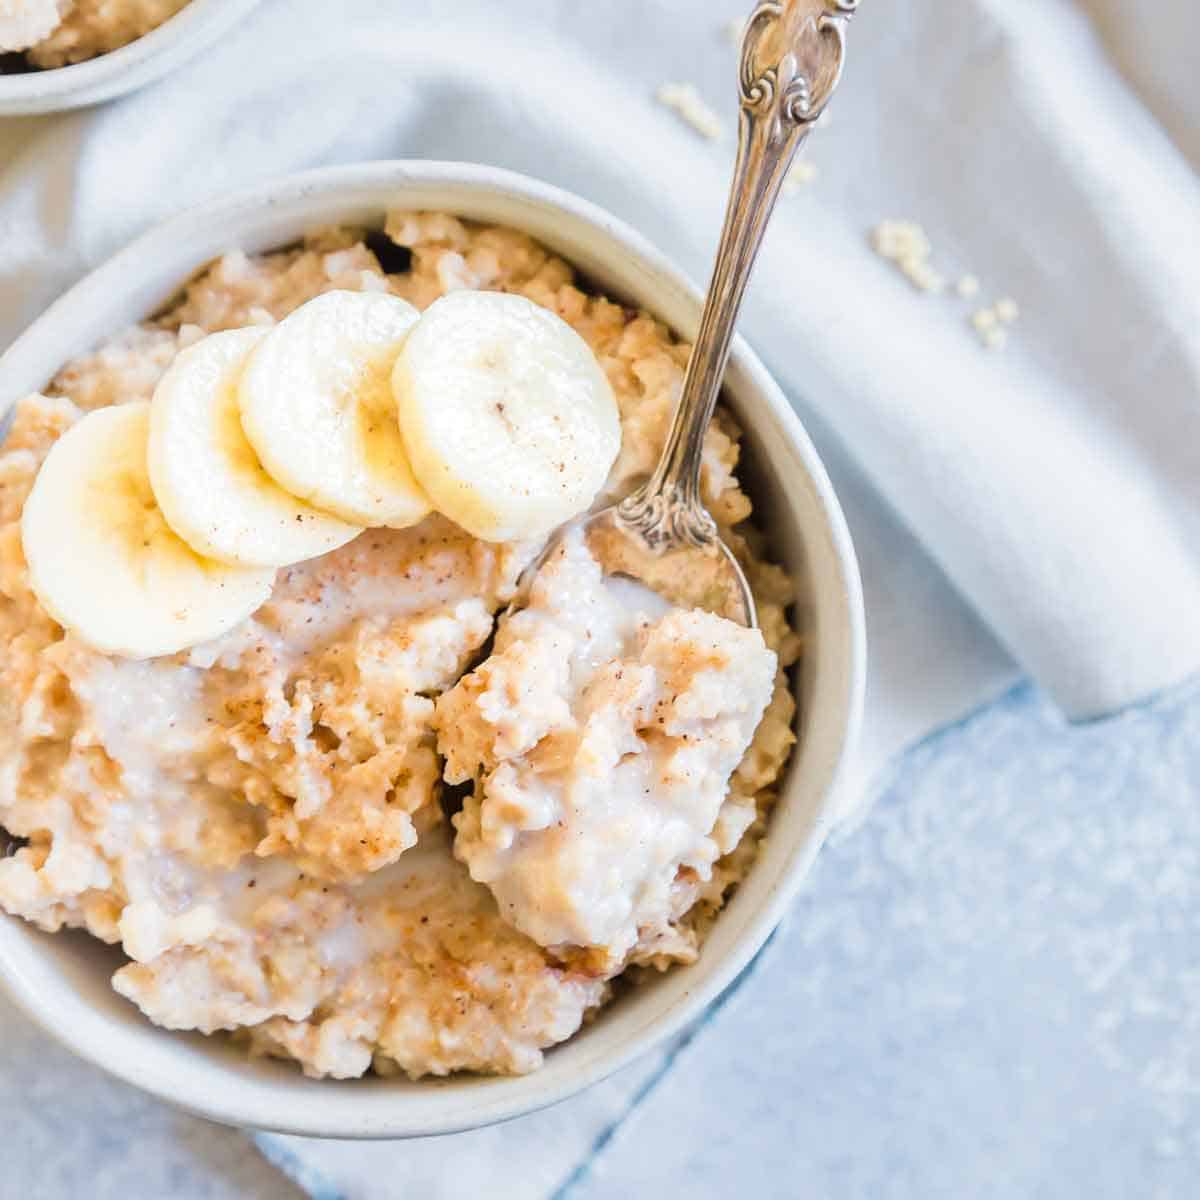 With cinnamon and vanilla, this creamy millet porridge is the perfect breakfast blank state to add your favorite toppings.